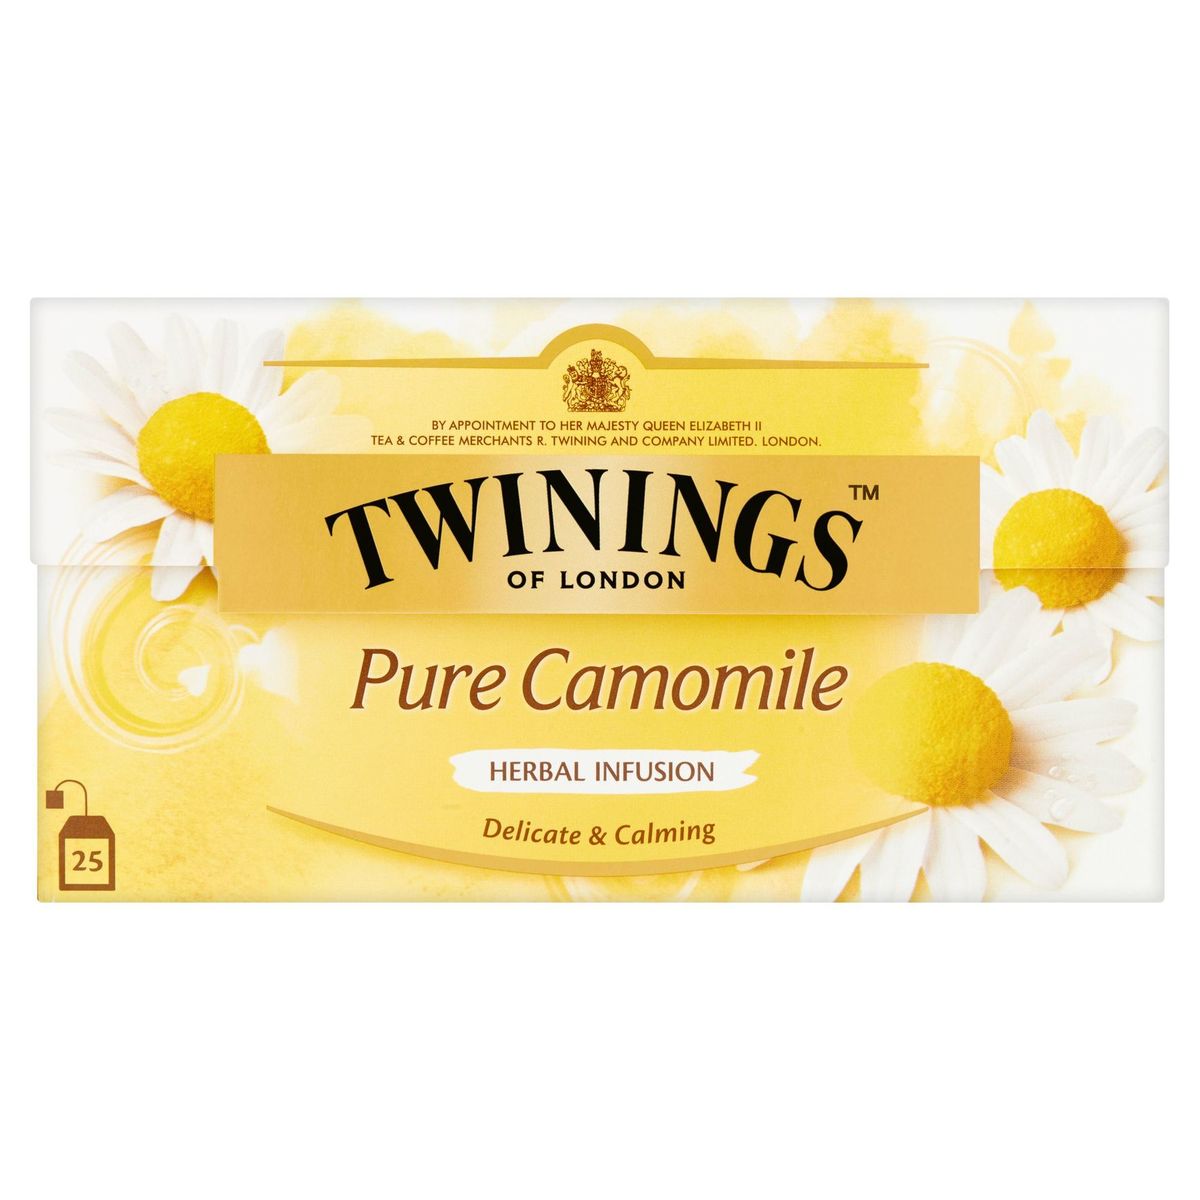 Twinings of London Pure Camomile Herbal Infusion 25 x 1 g